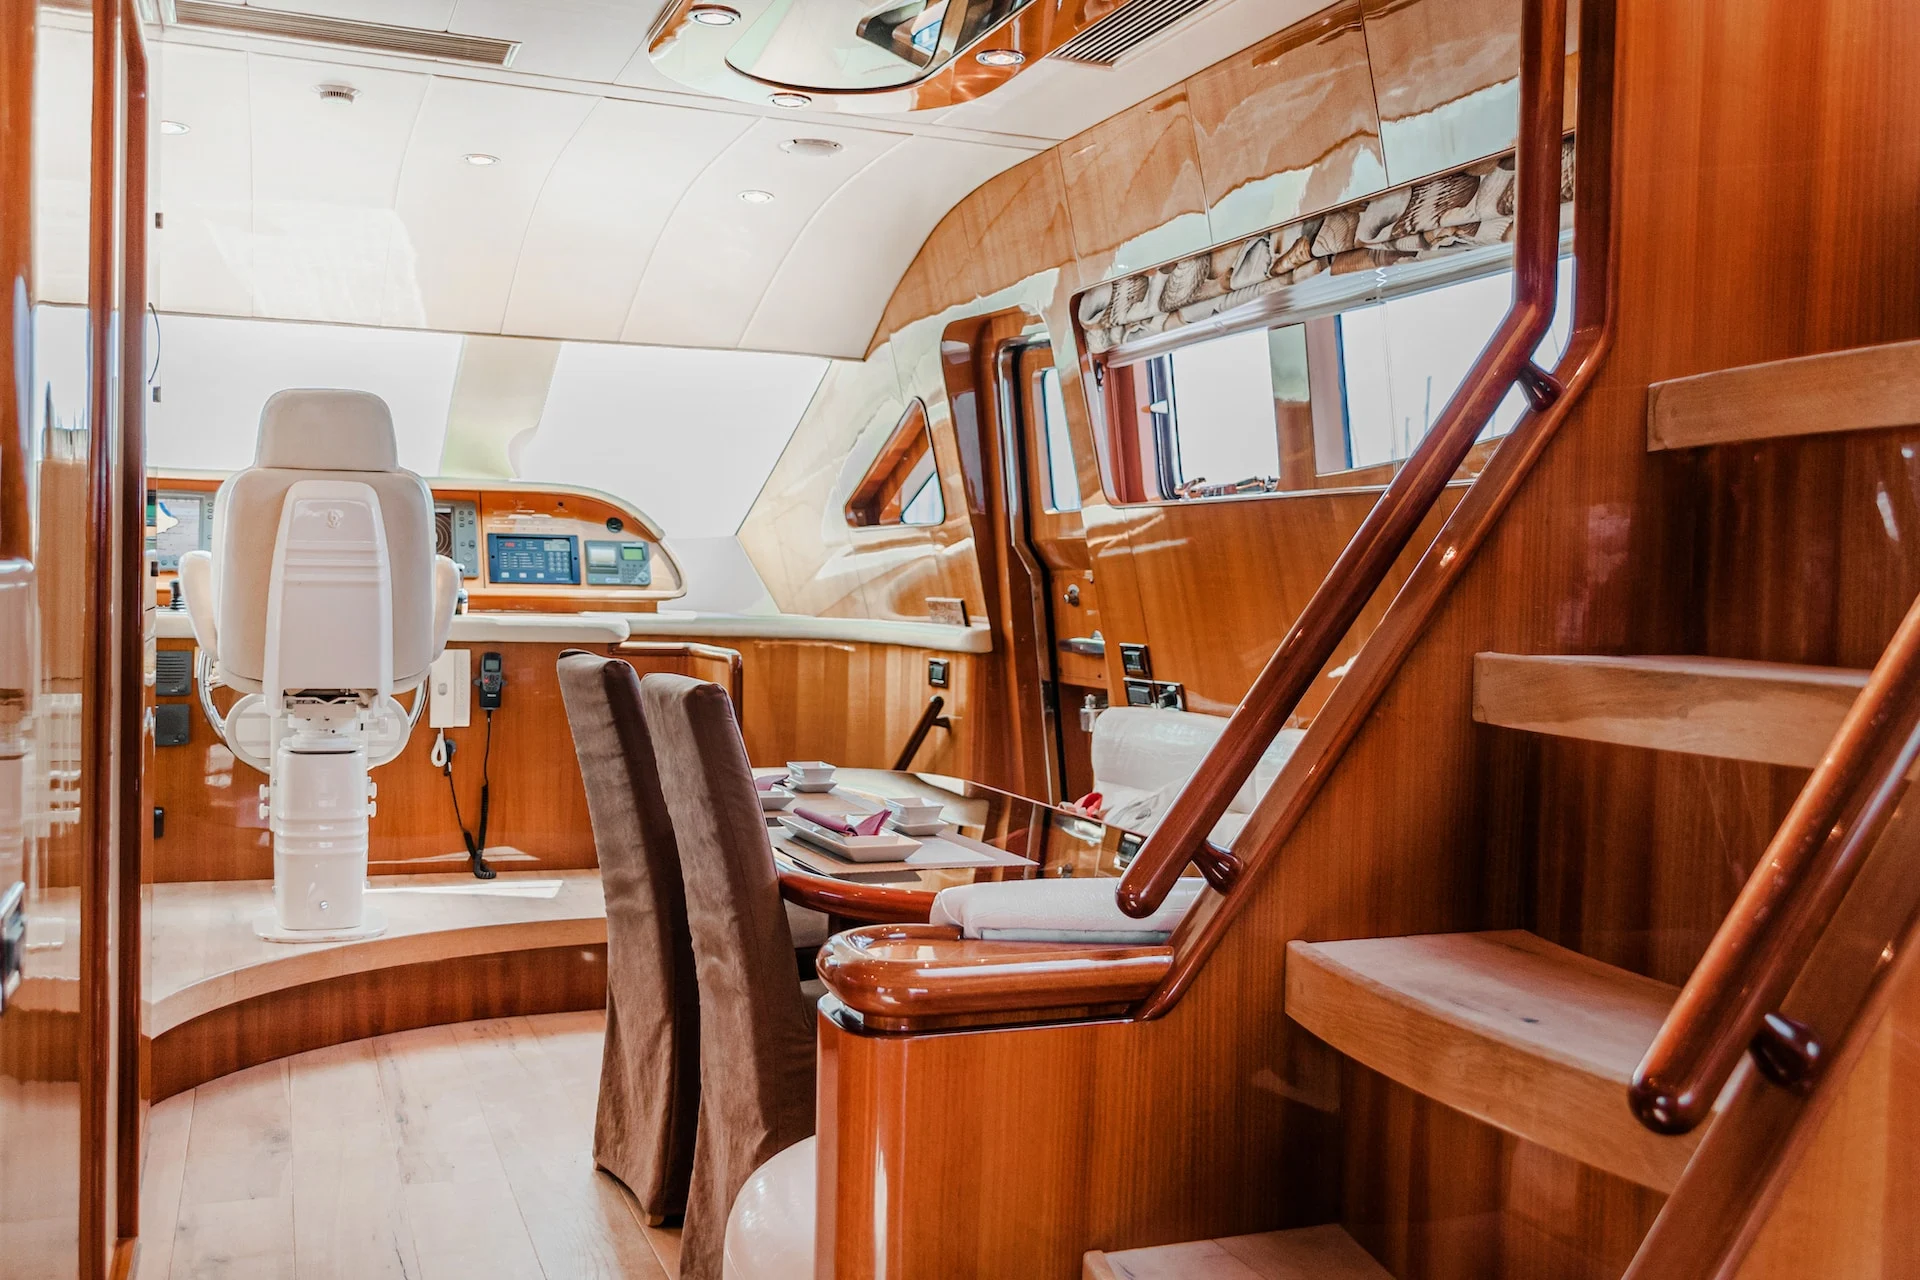 The Most Luxurious Yachts' Interior Design